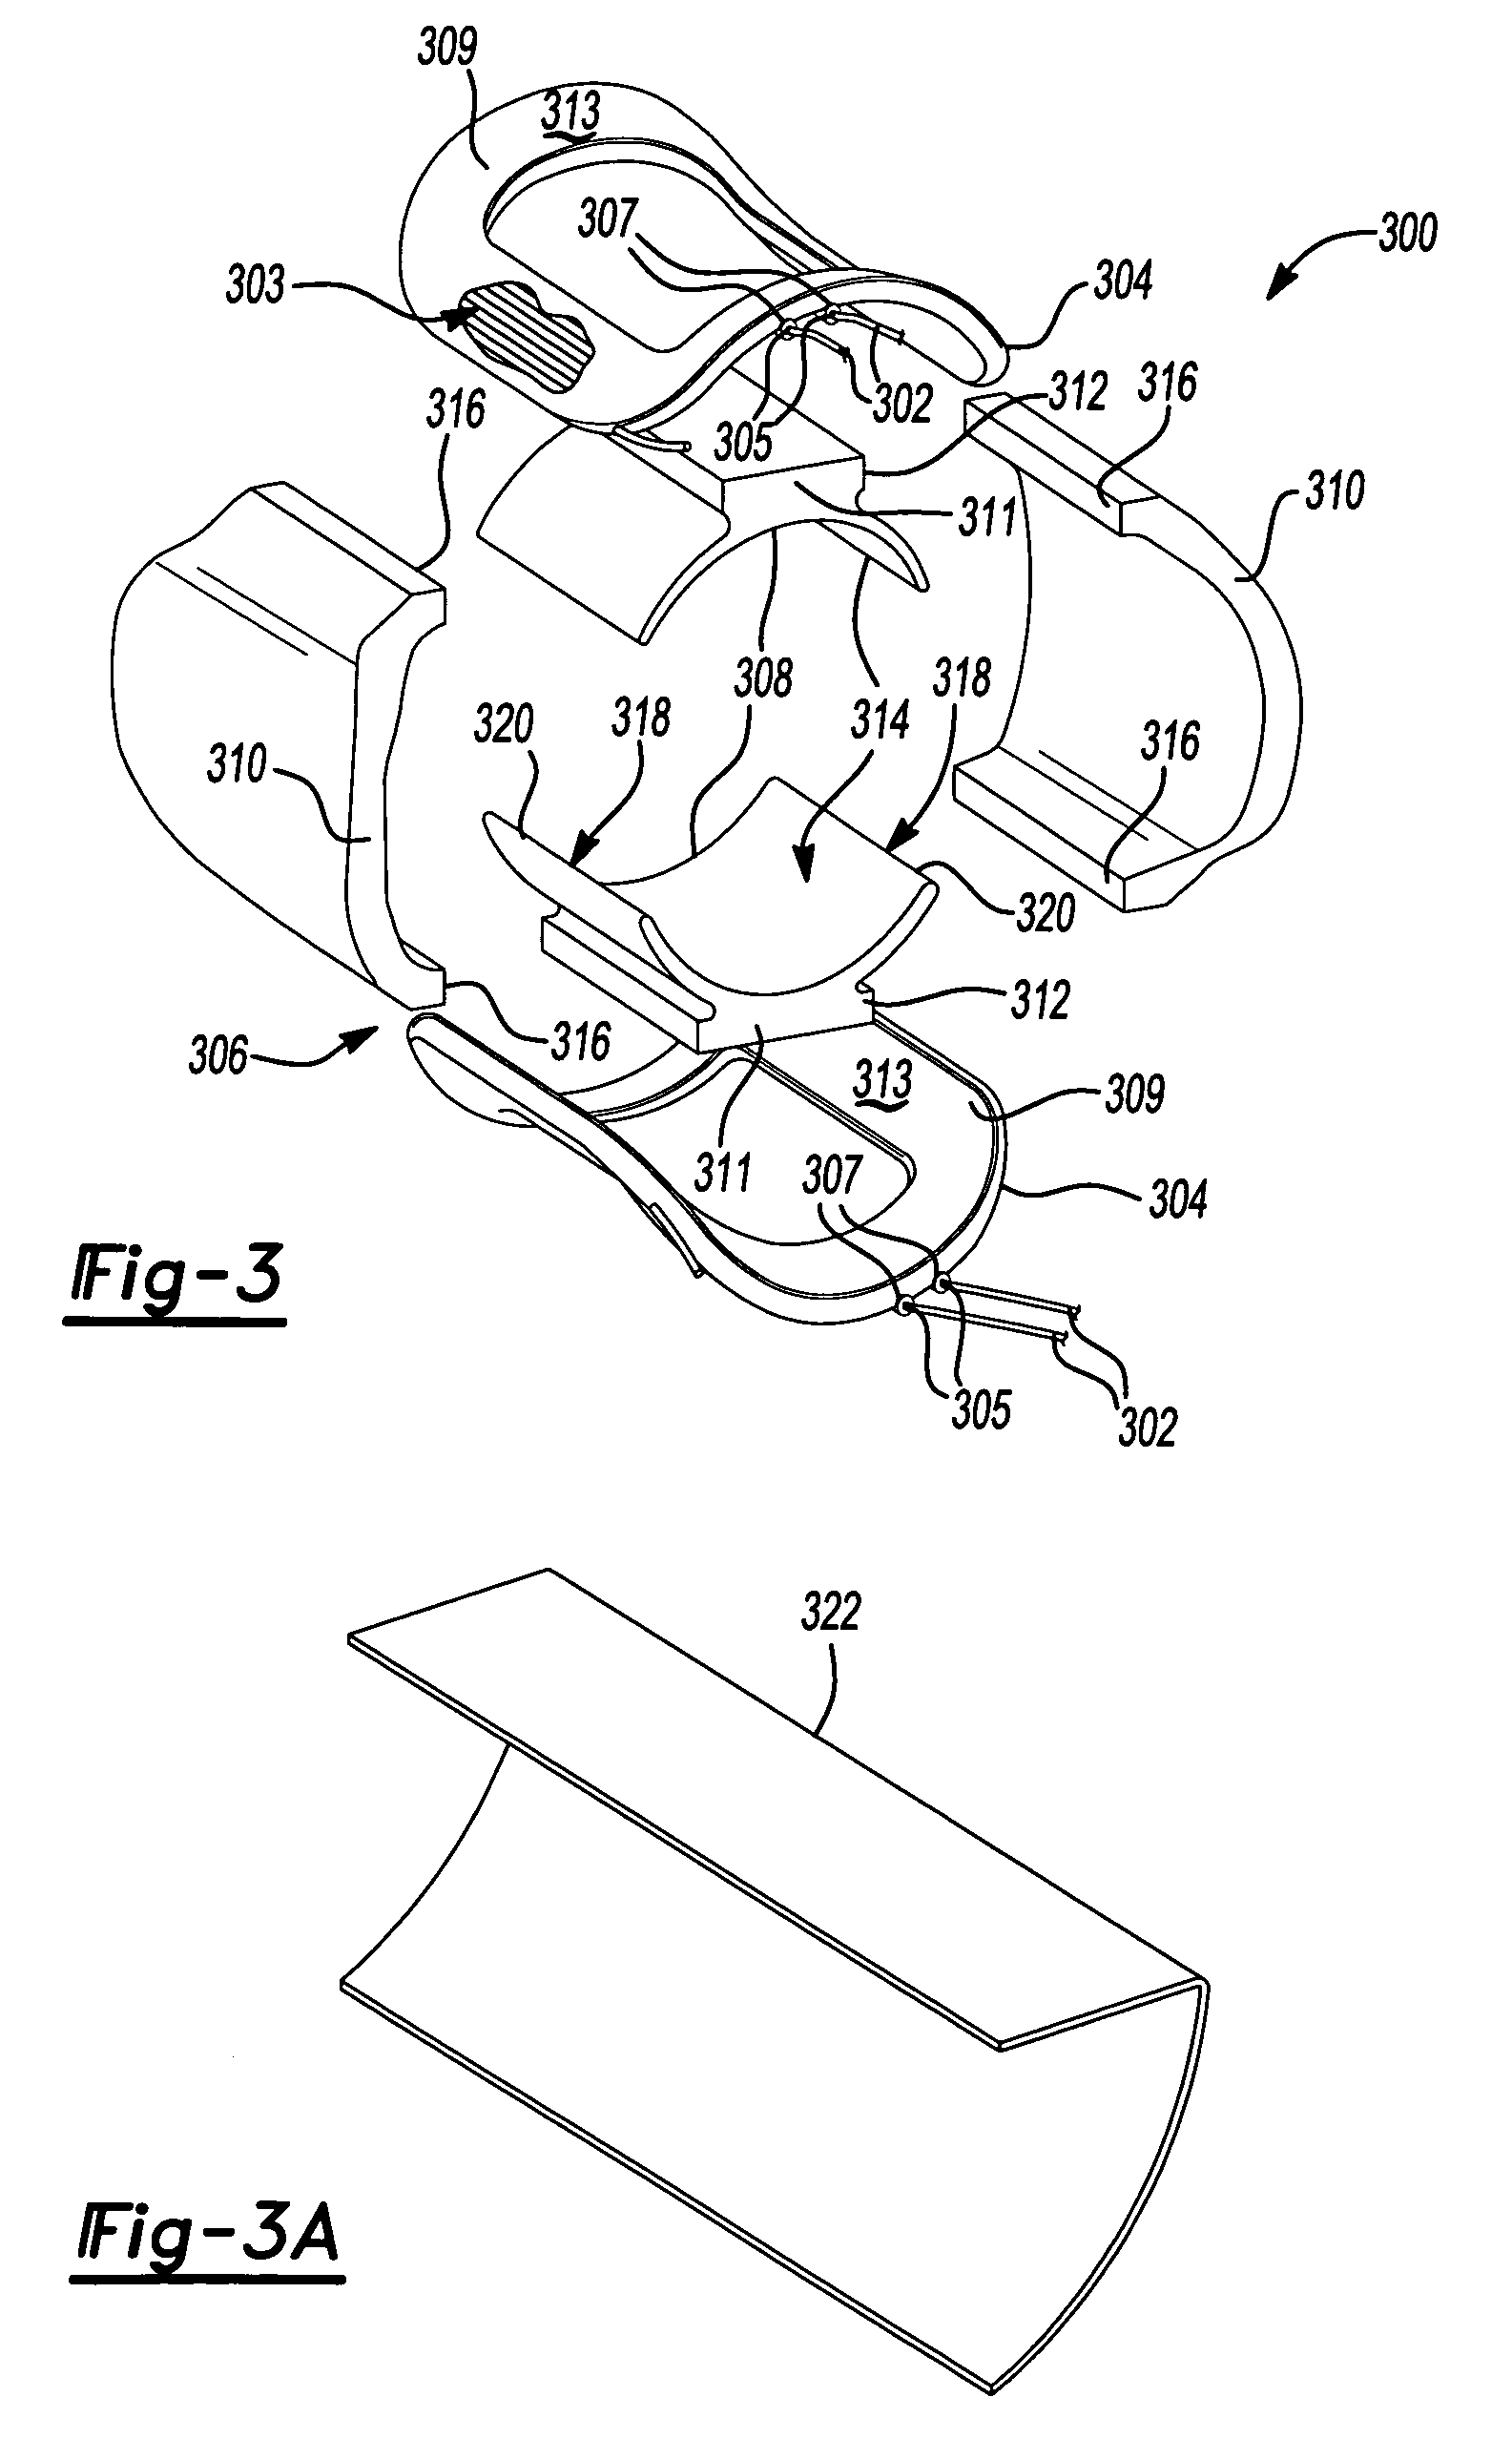 Field assemblies and methods of making same